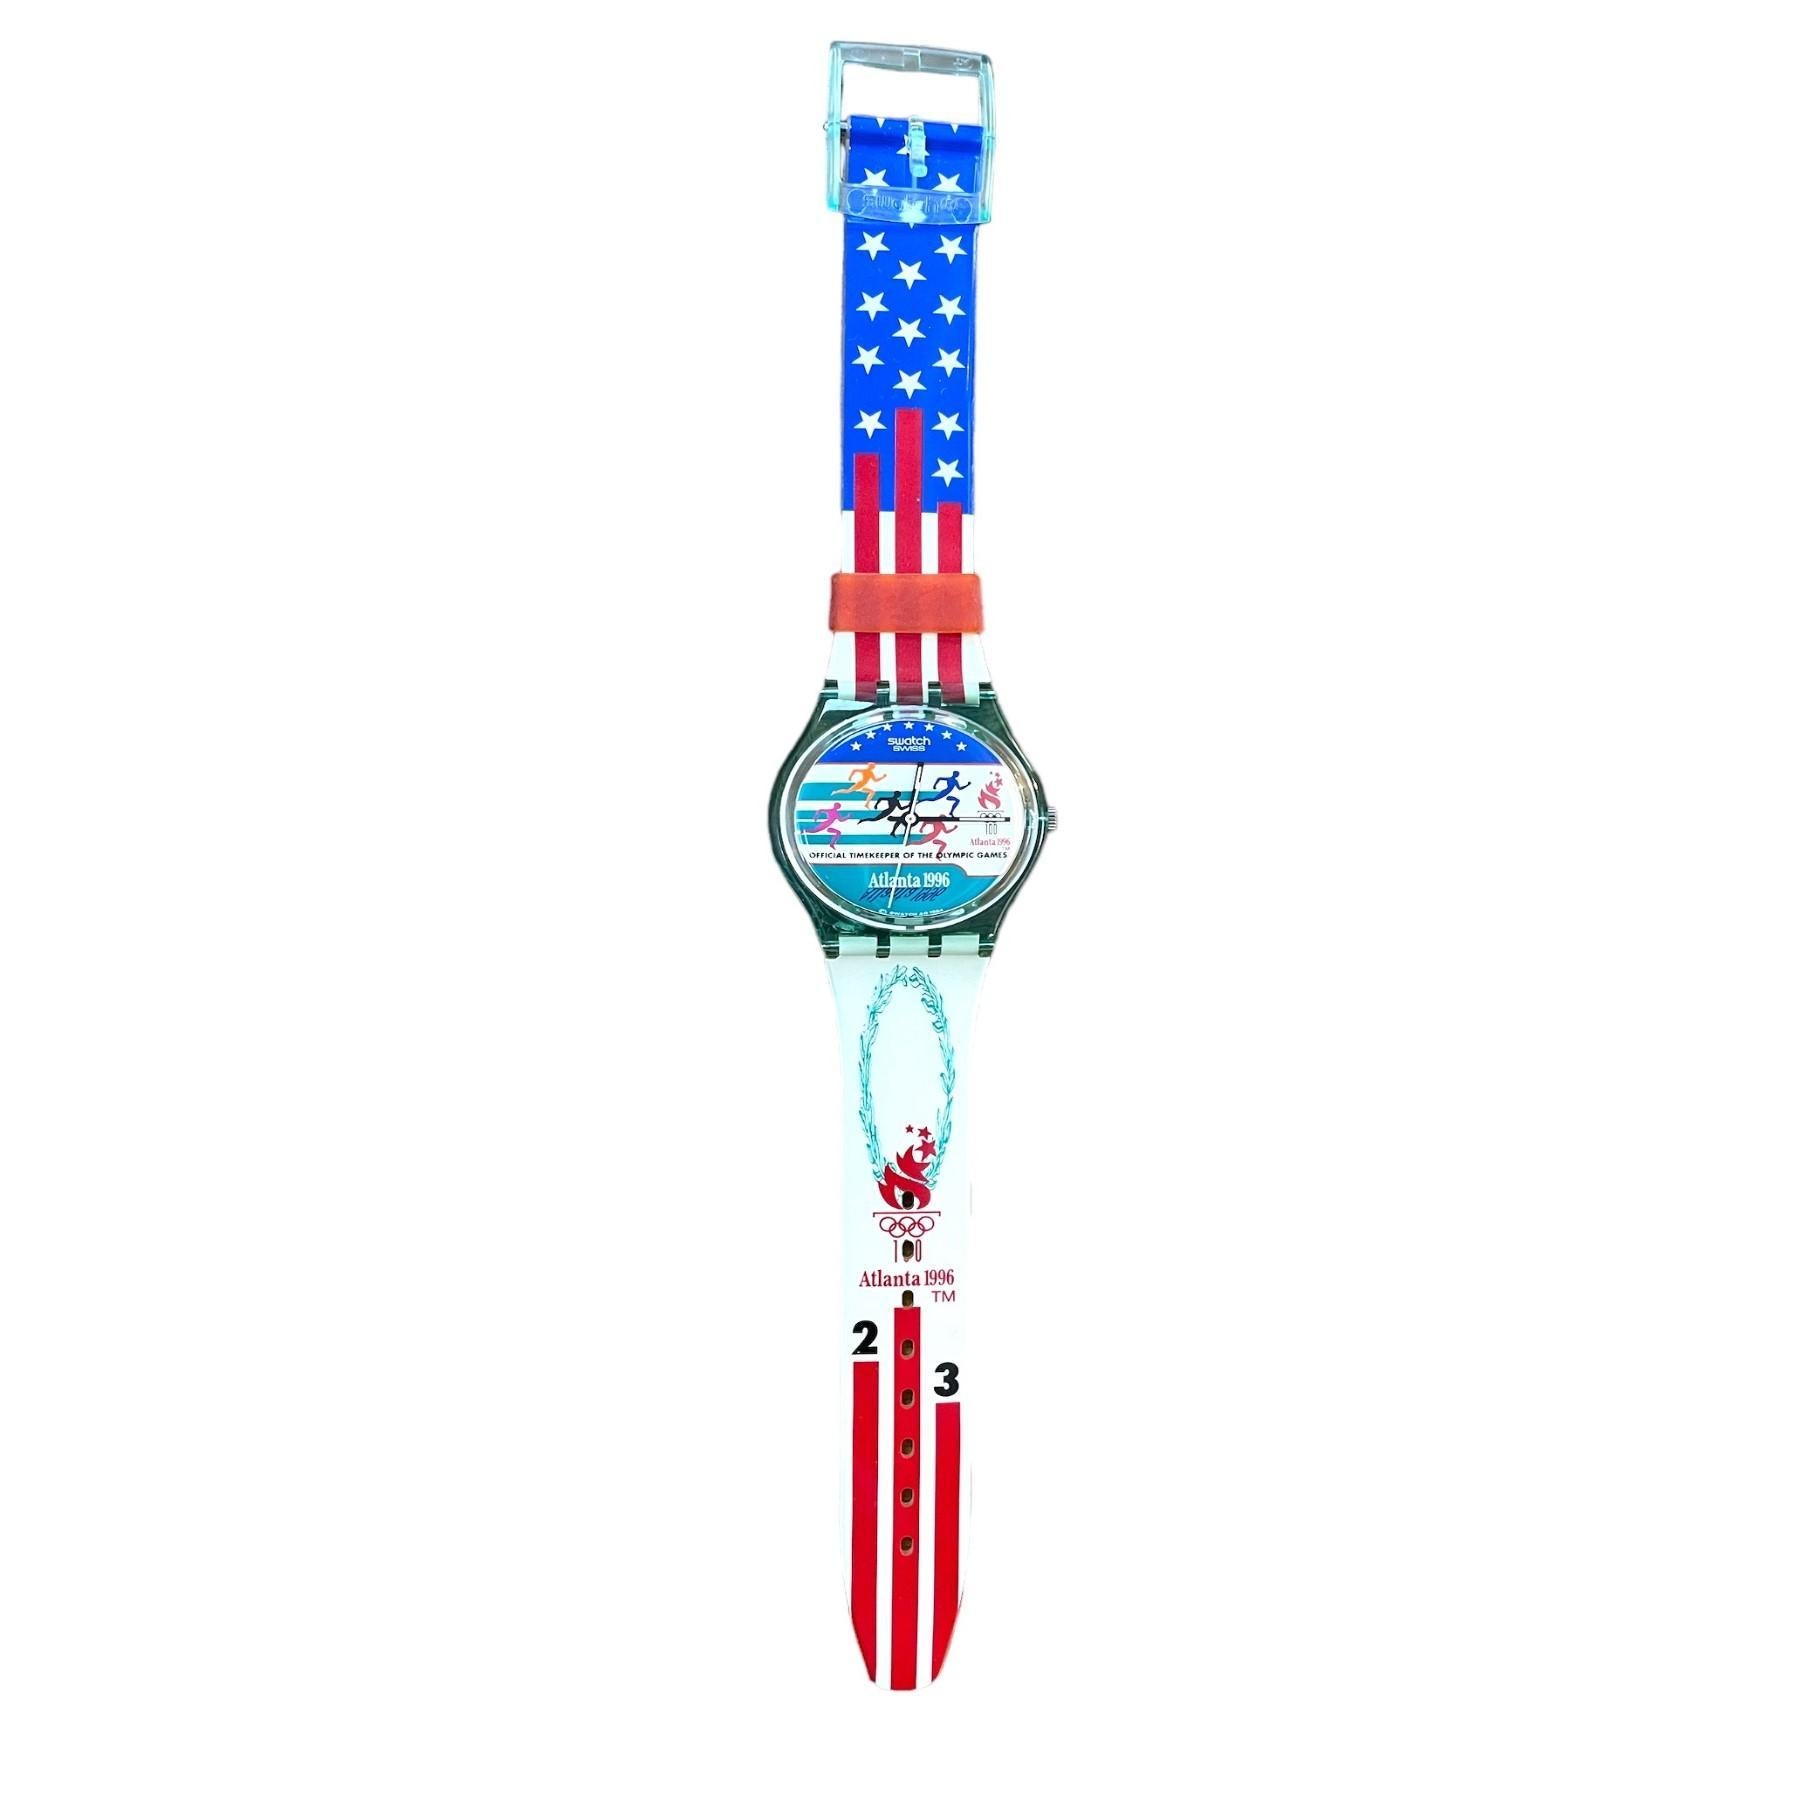 Introducing the Vintage Swatch Swiss Atlanta 1996 Olympic Games LX106 Men's Wrist Watch, the official timekeeper of the historic Centennial Olympic Games in Atlanta. This brand new vintage timepiece holds a piece of Olympic history and adds a touch